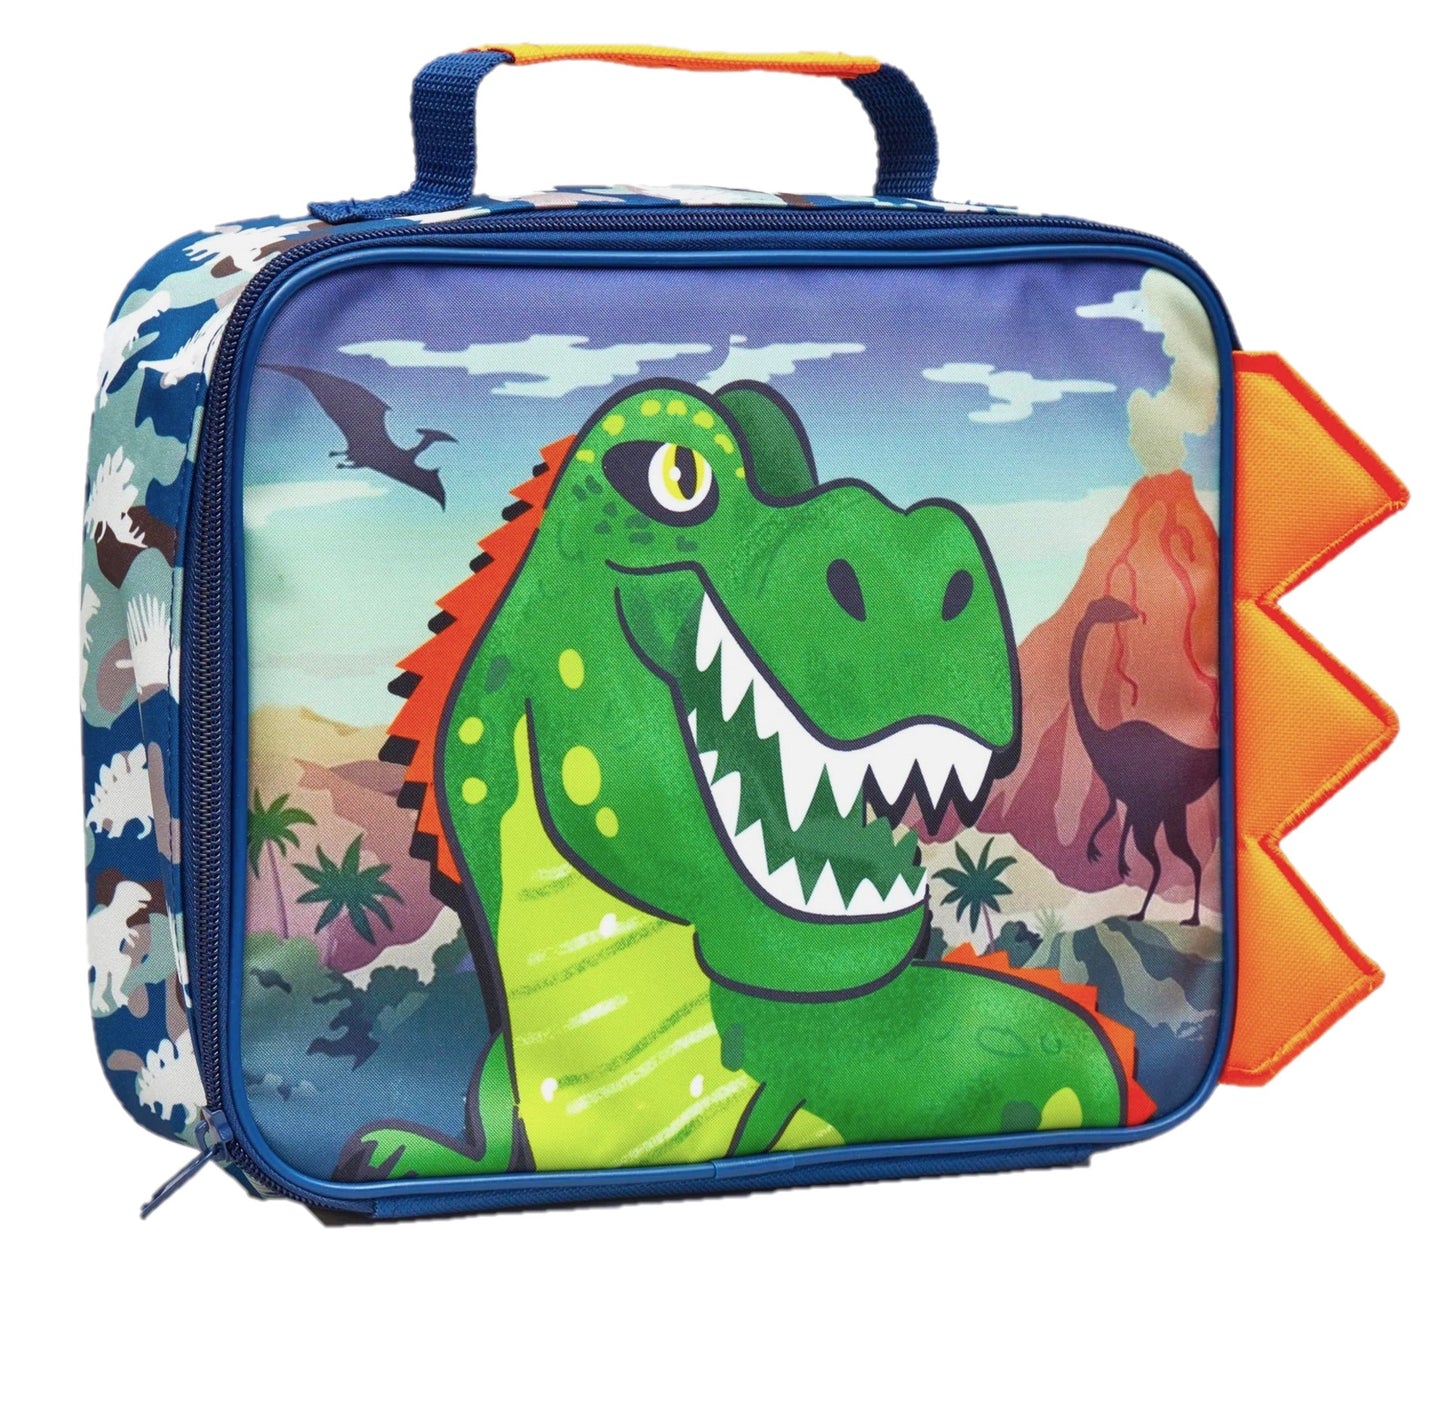 T-Rex Dinosaur Insulated Lunch Bag with Hand Carry Strap